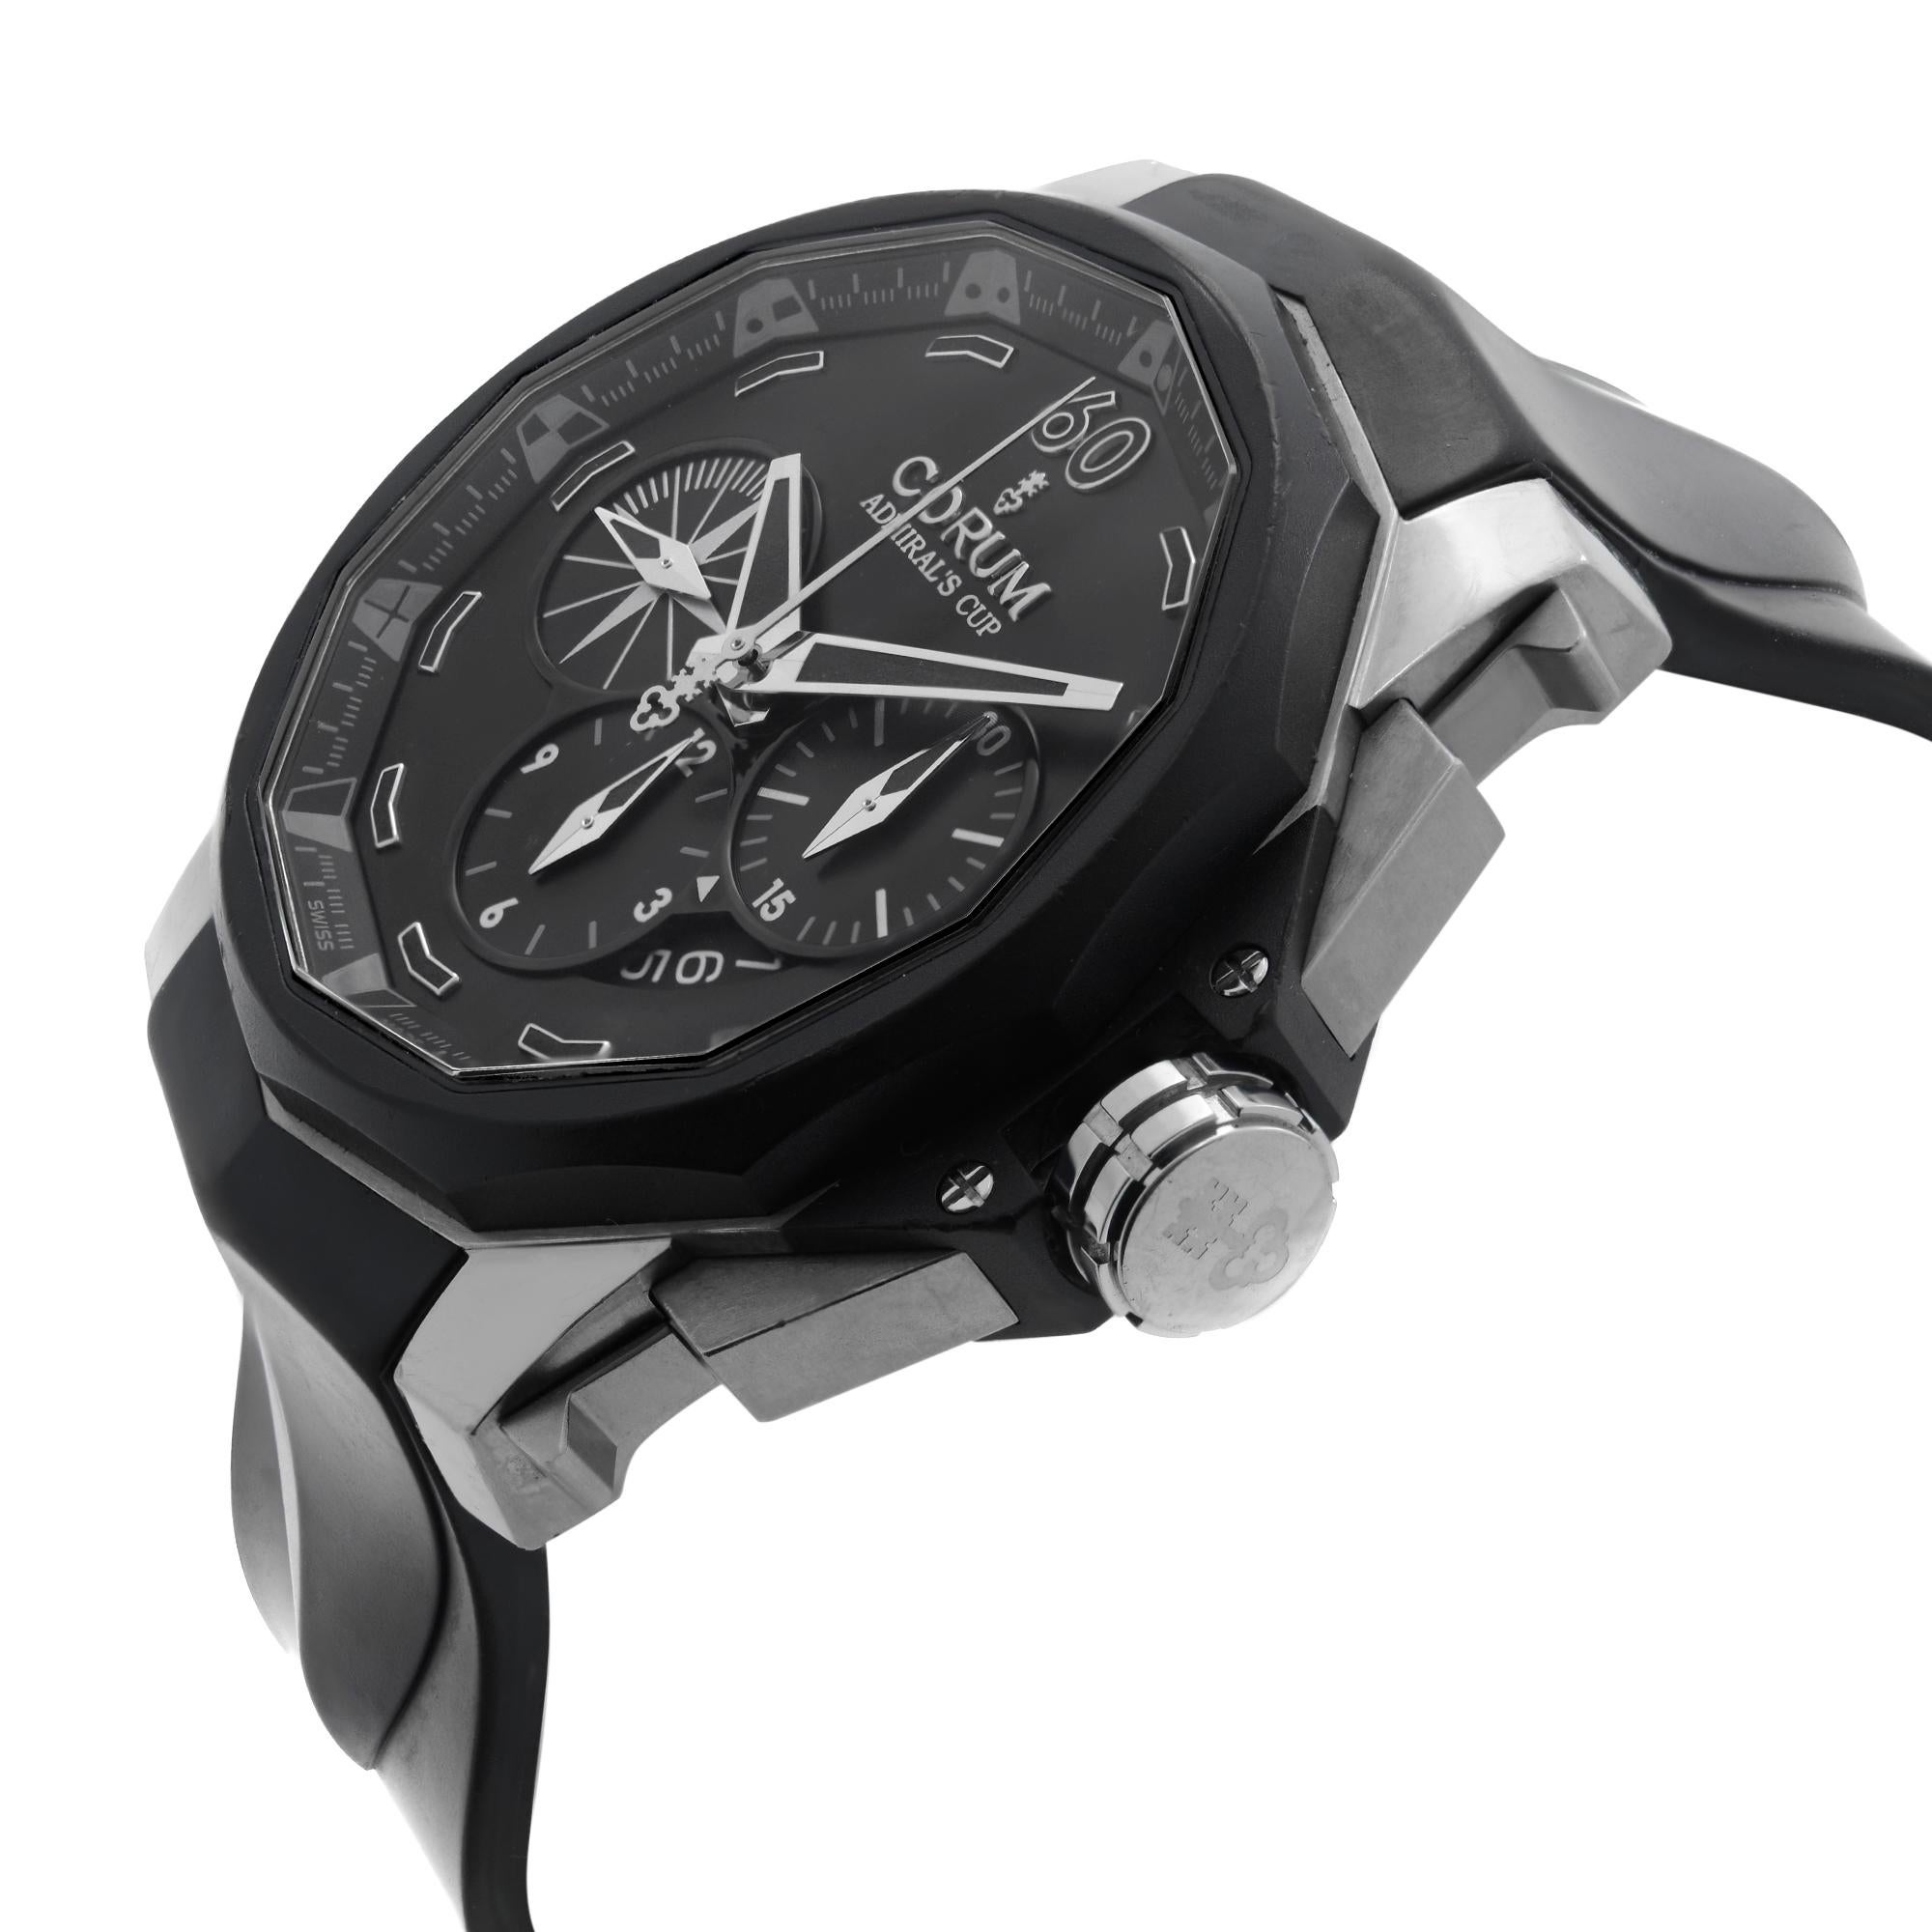 48mm automatic watch